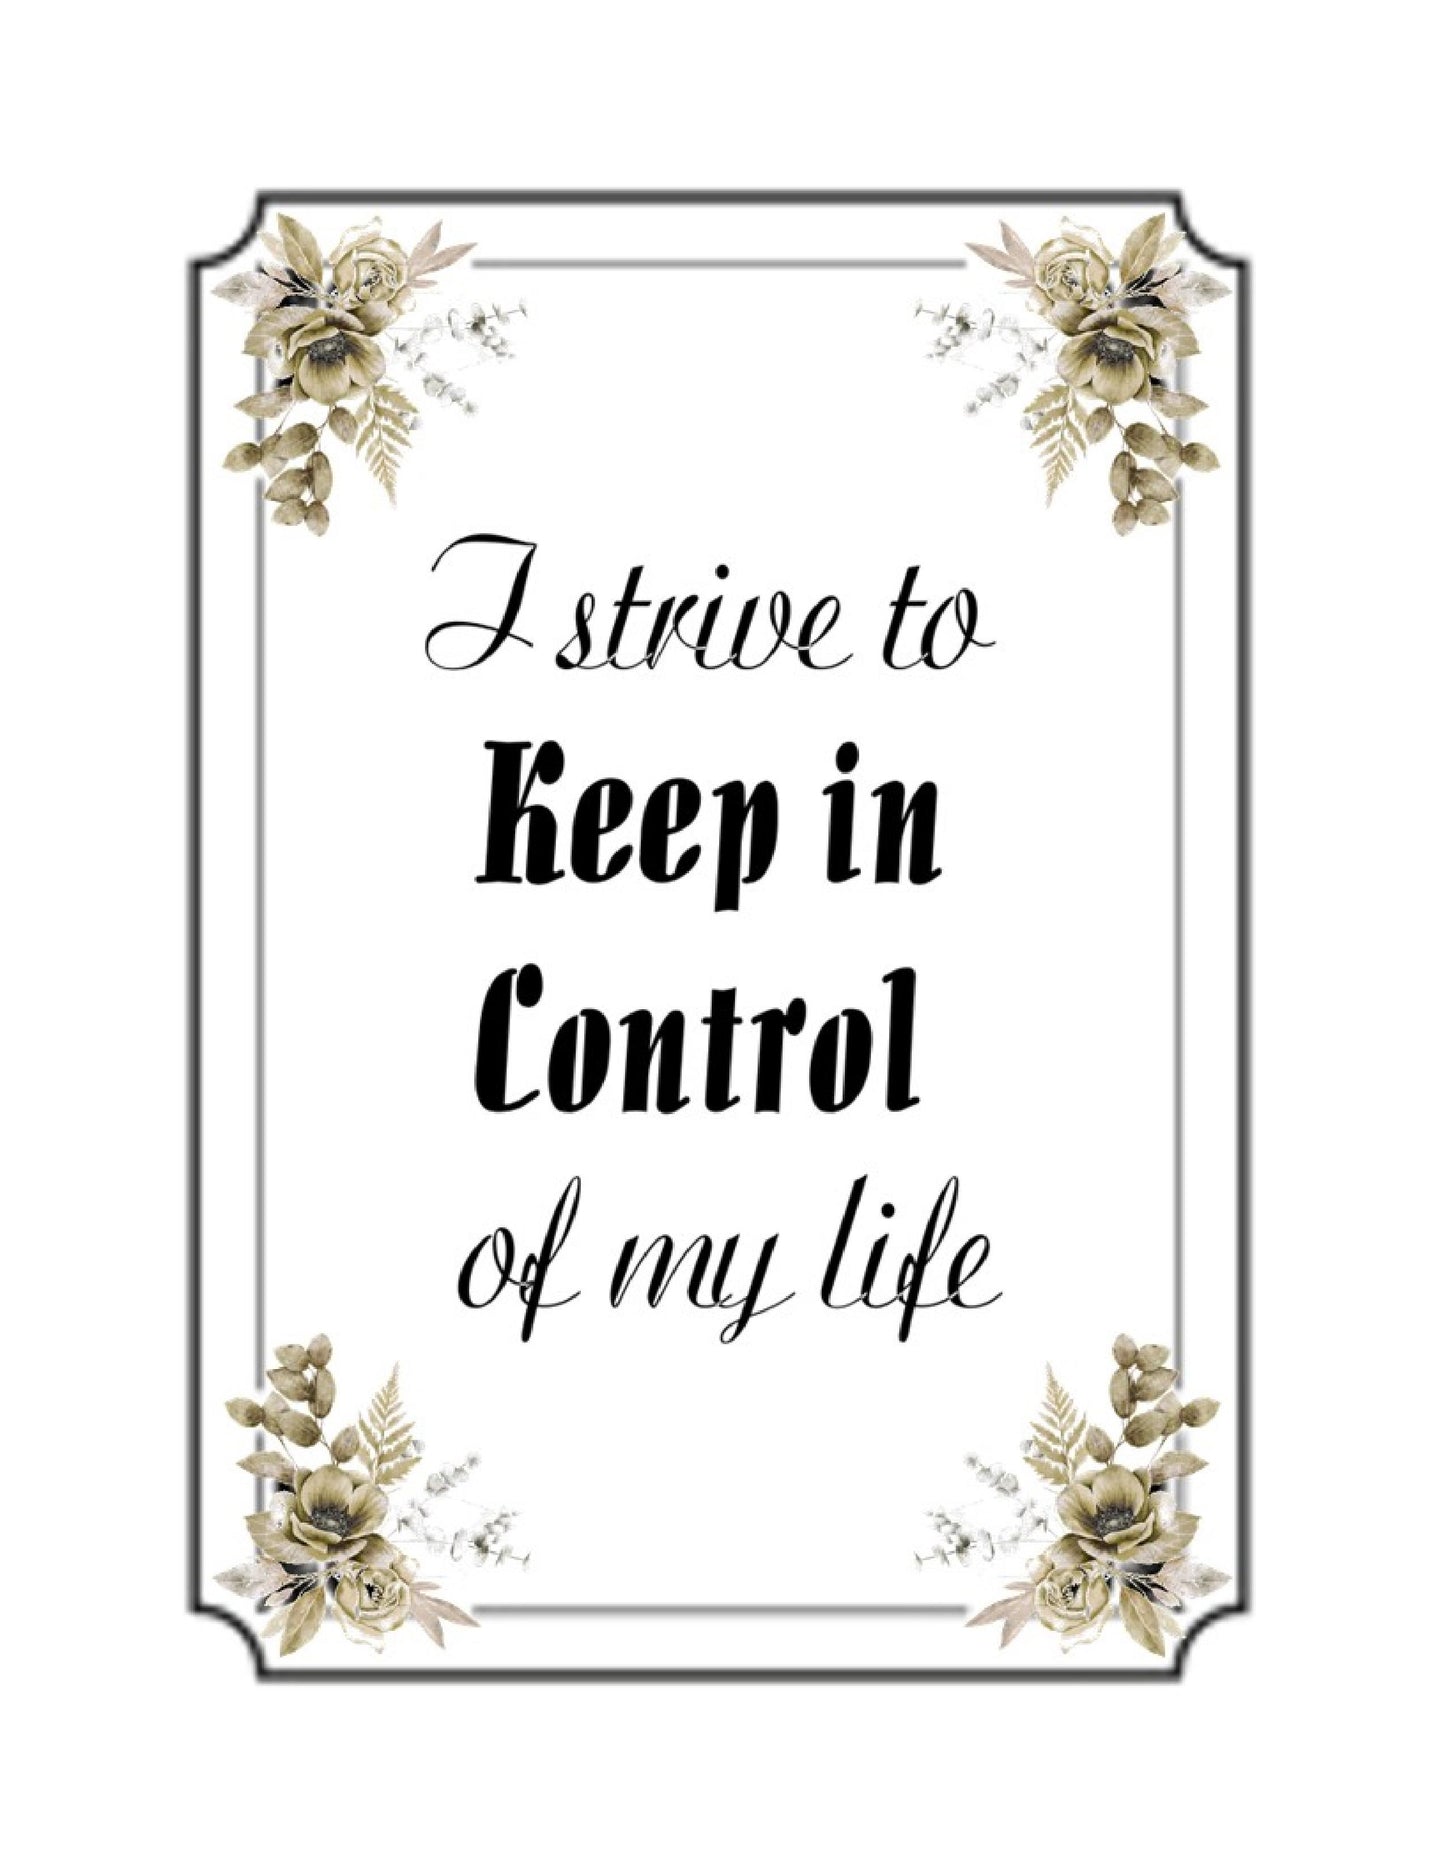 Courageous, Determined, Motivated, In Control Of Your Life Positive Affirmations Set of 4